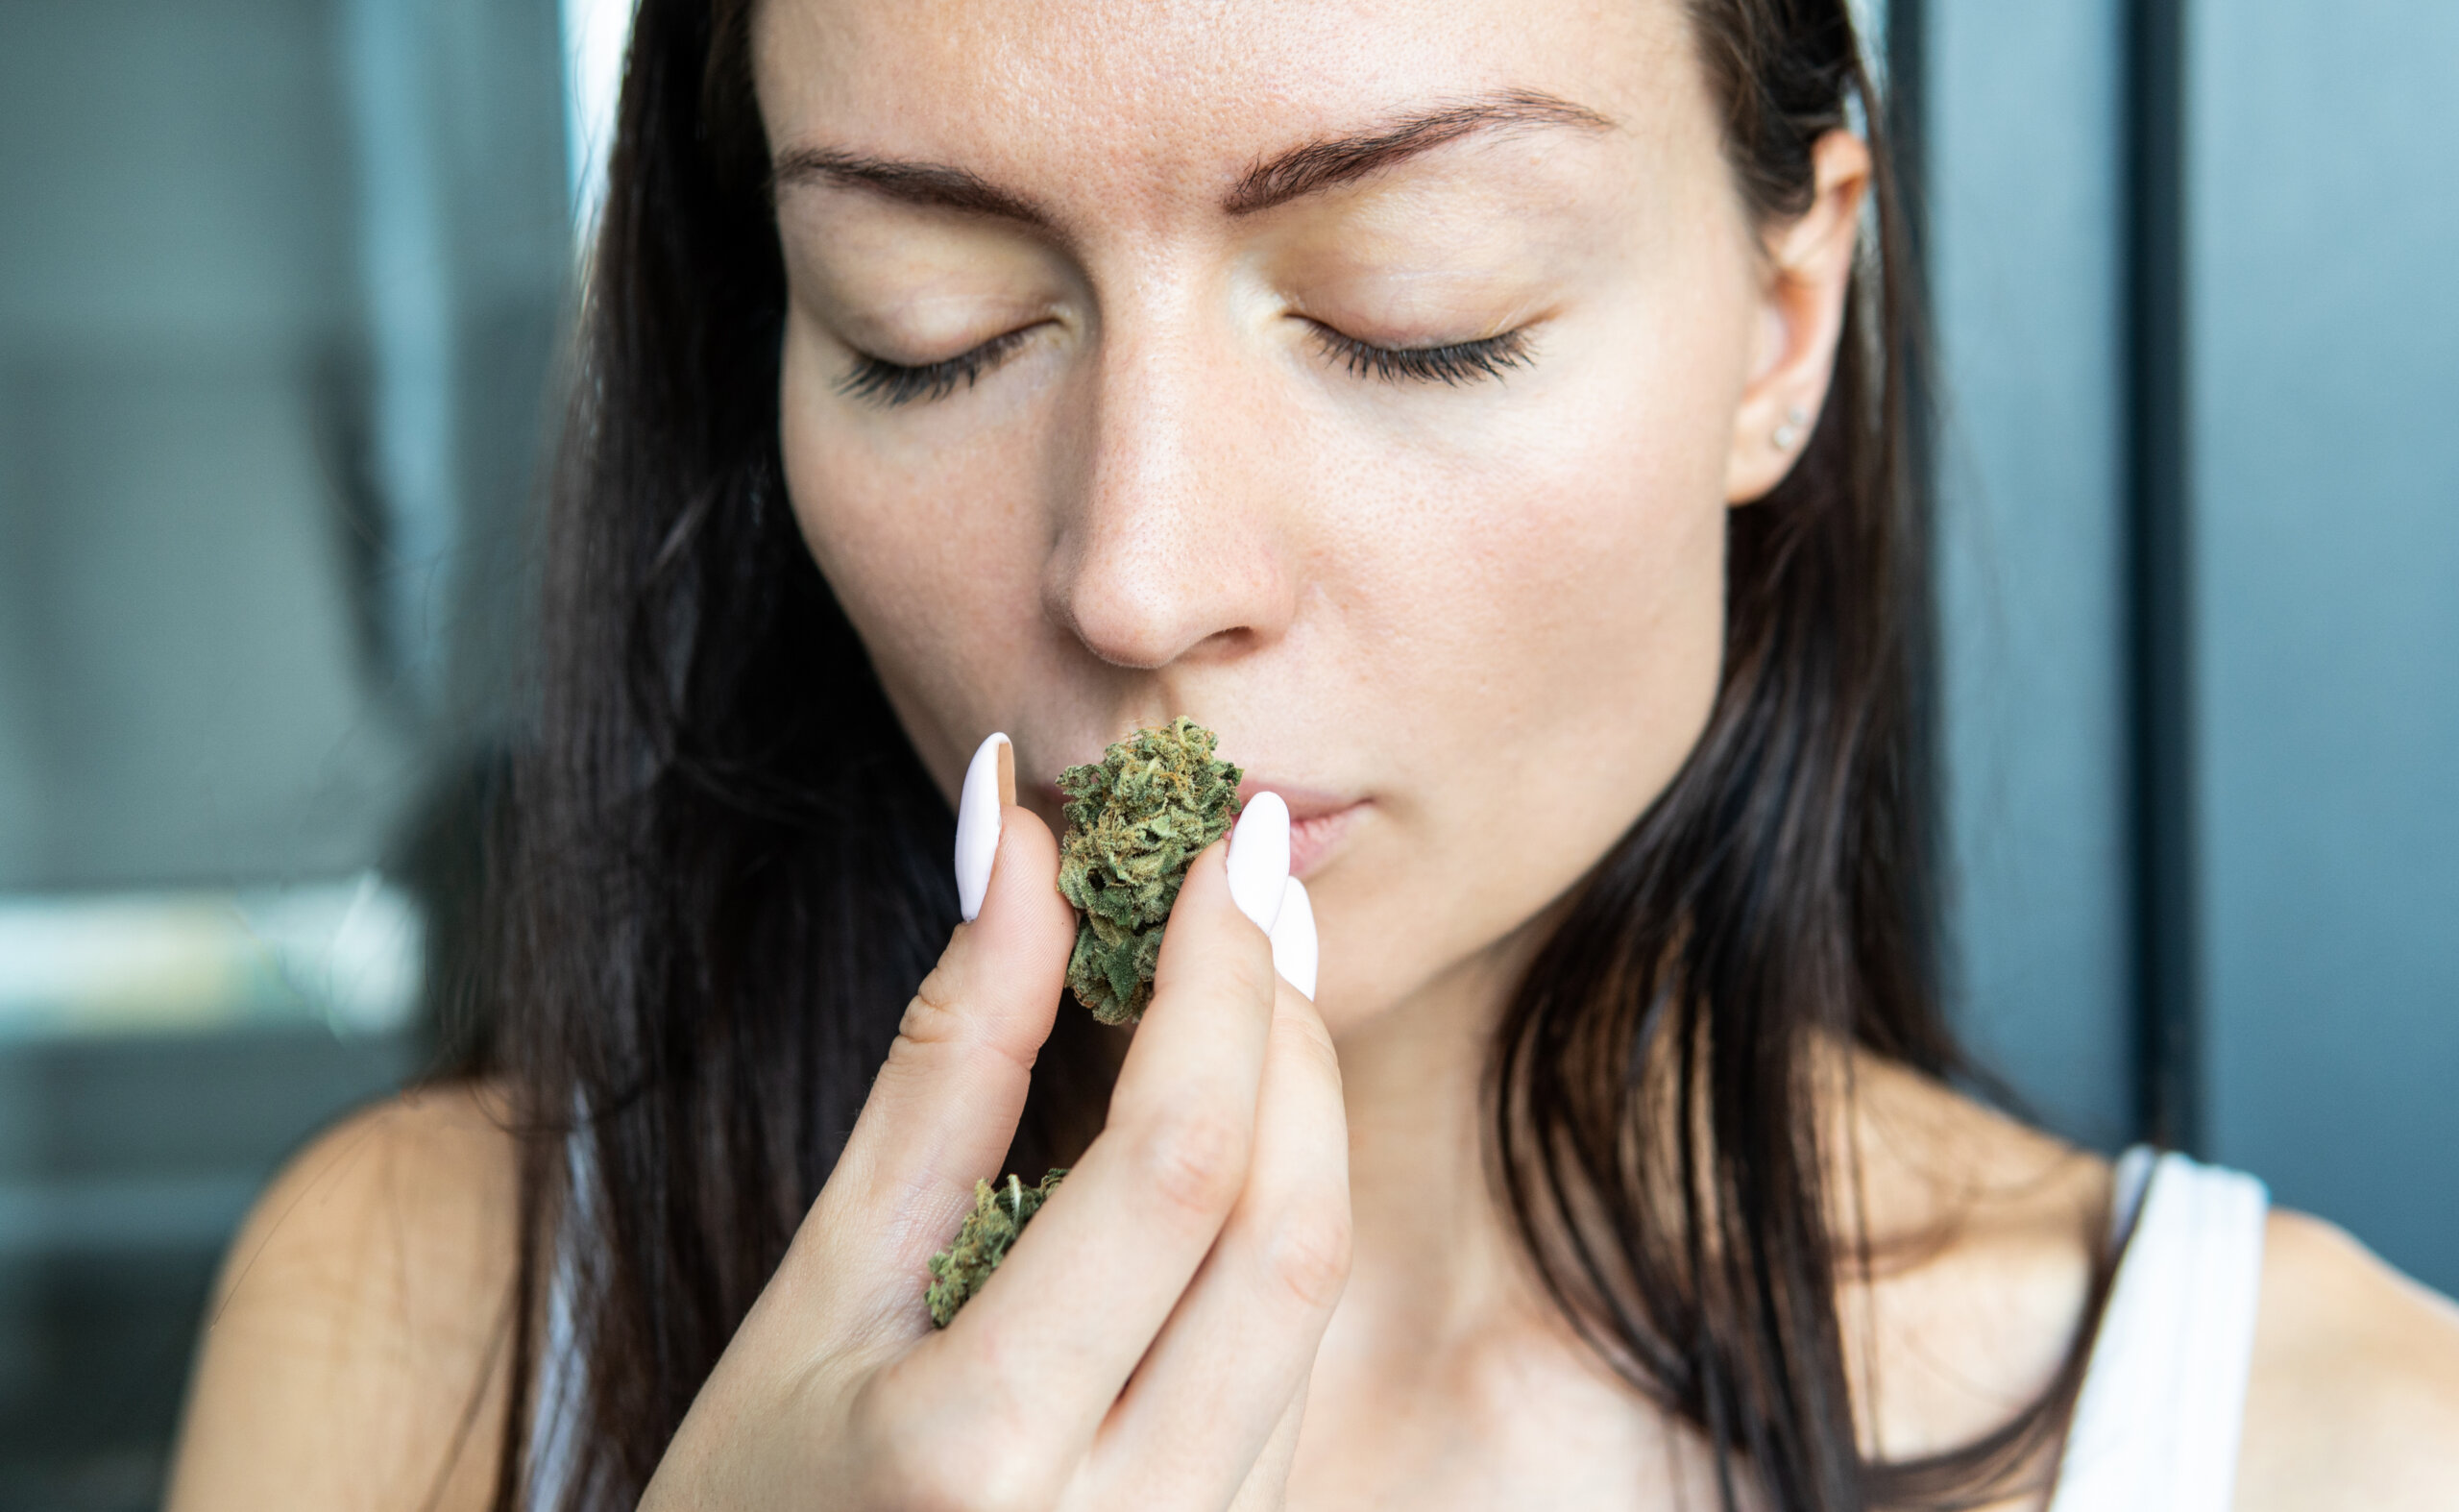 How to Get Rid of Weed Smell – 5 Simple Techniques